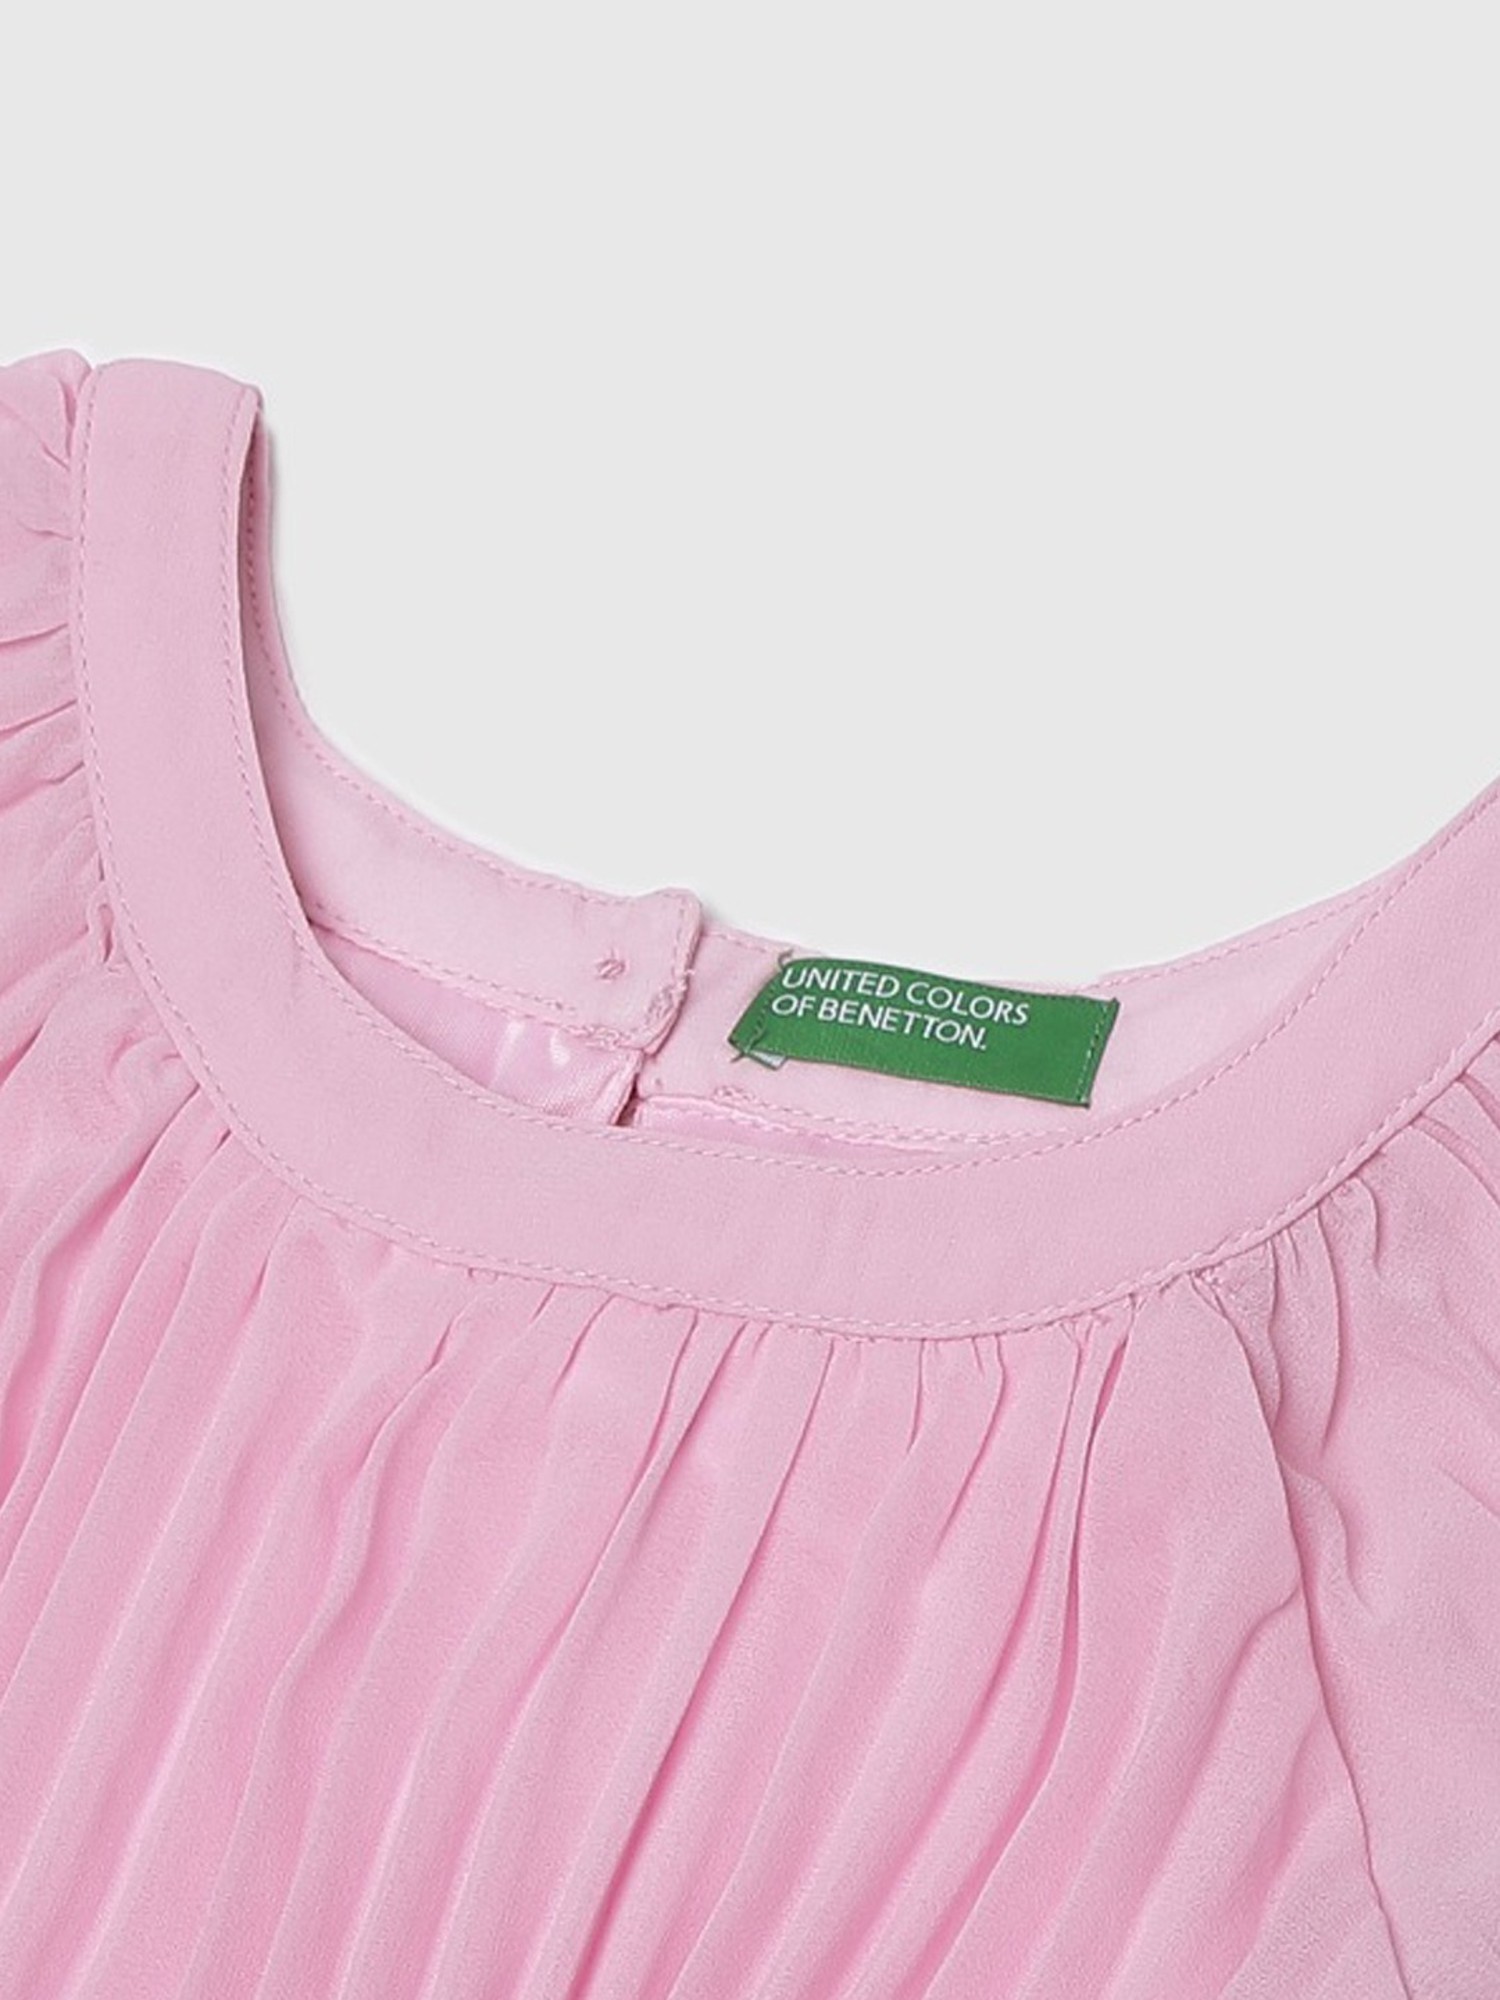 Benetton united colours of benetton girl dress pink with elastic waist age 3-4 Y 